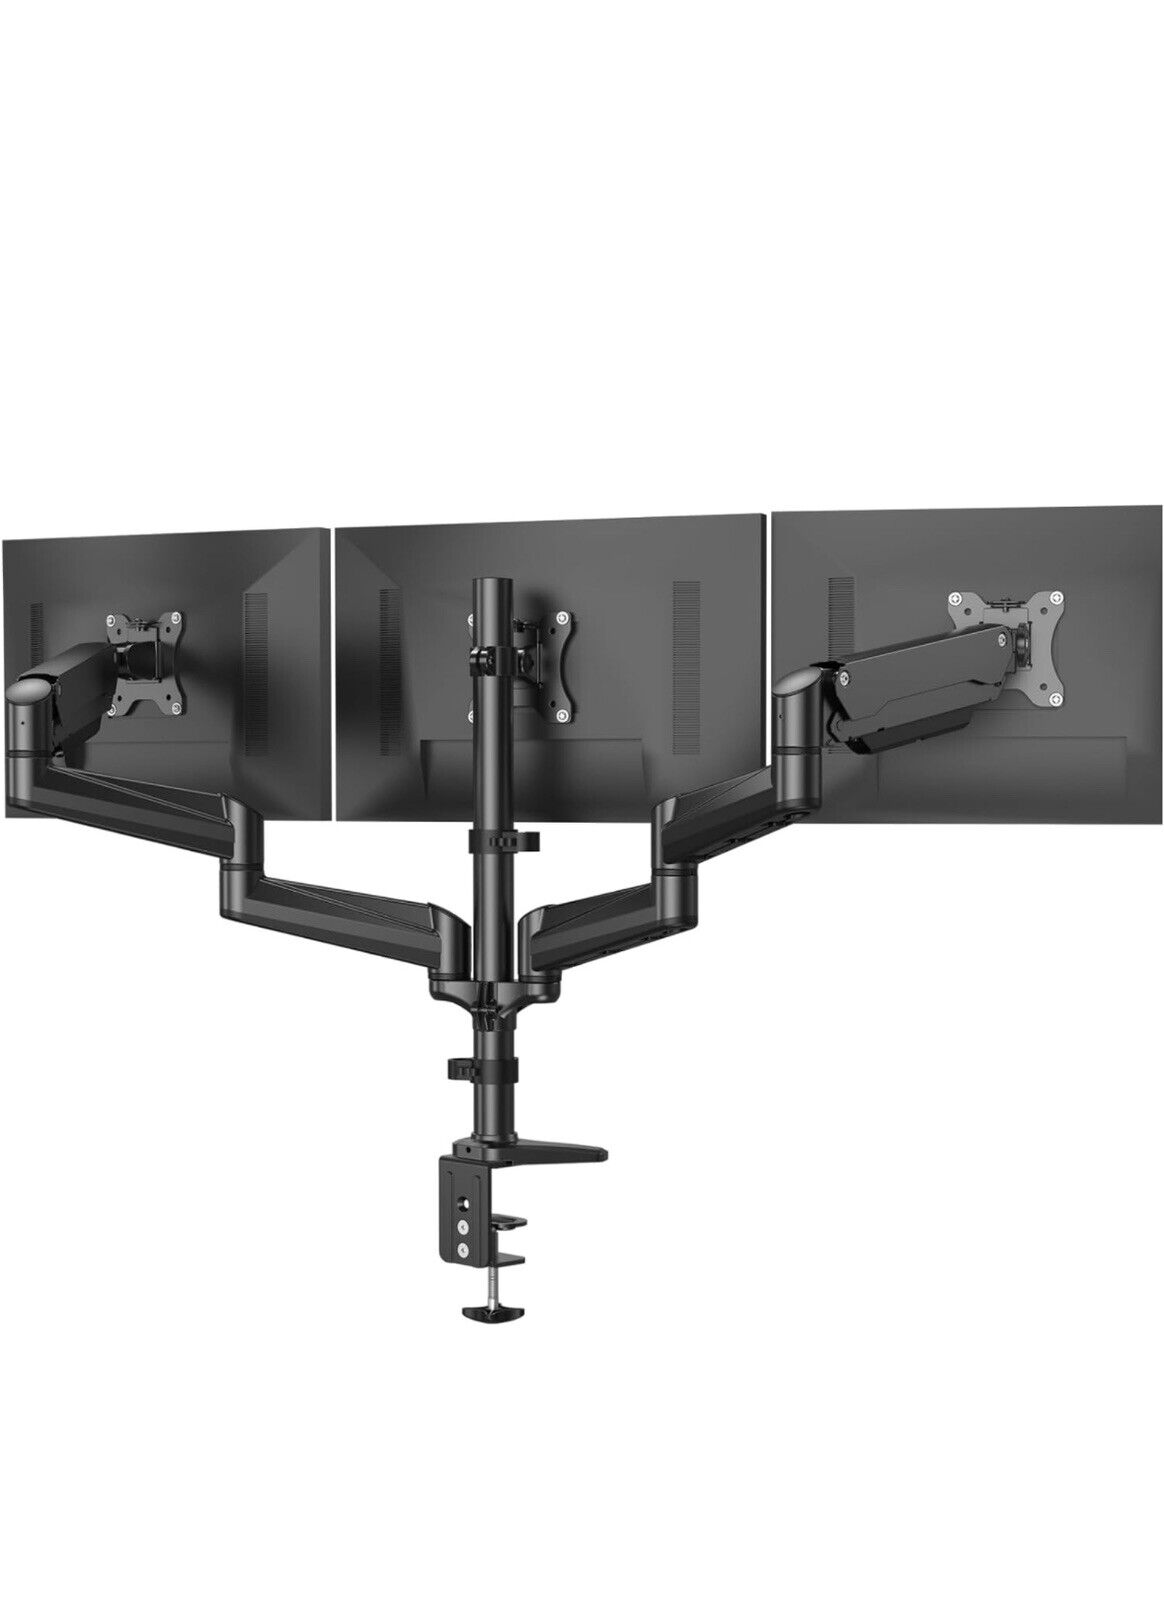 HUANUO Triple Monitor Mount for 17 to 32 inch Screens, Gas Spring Adjustment